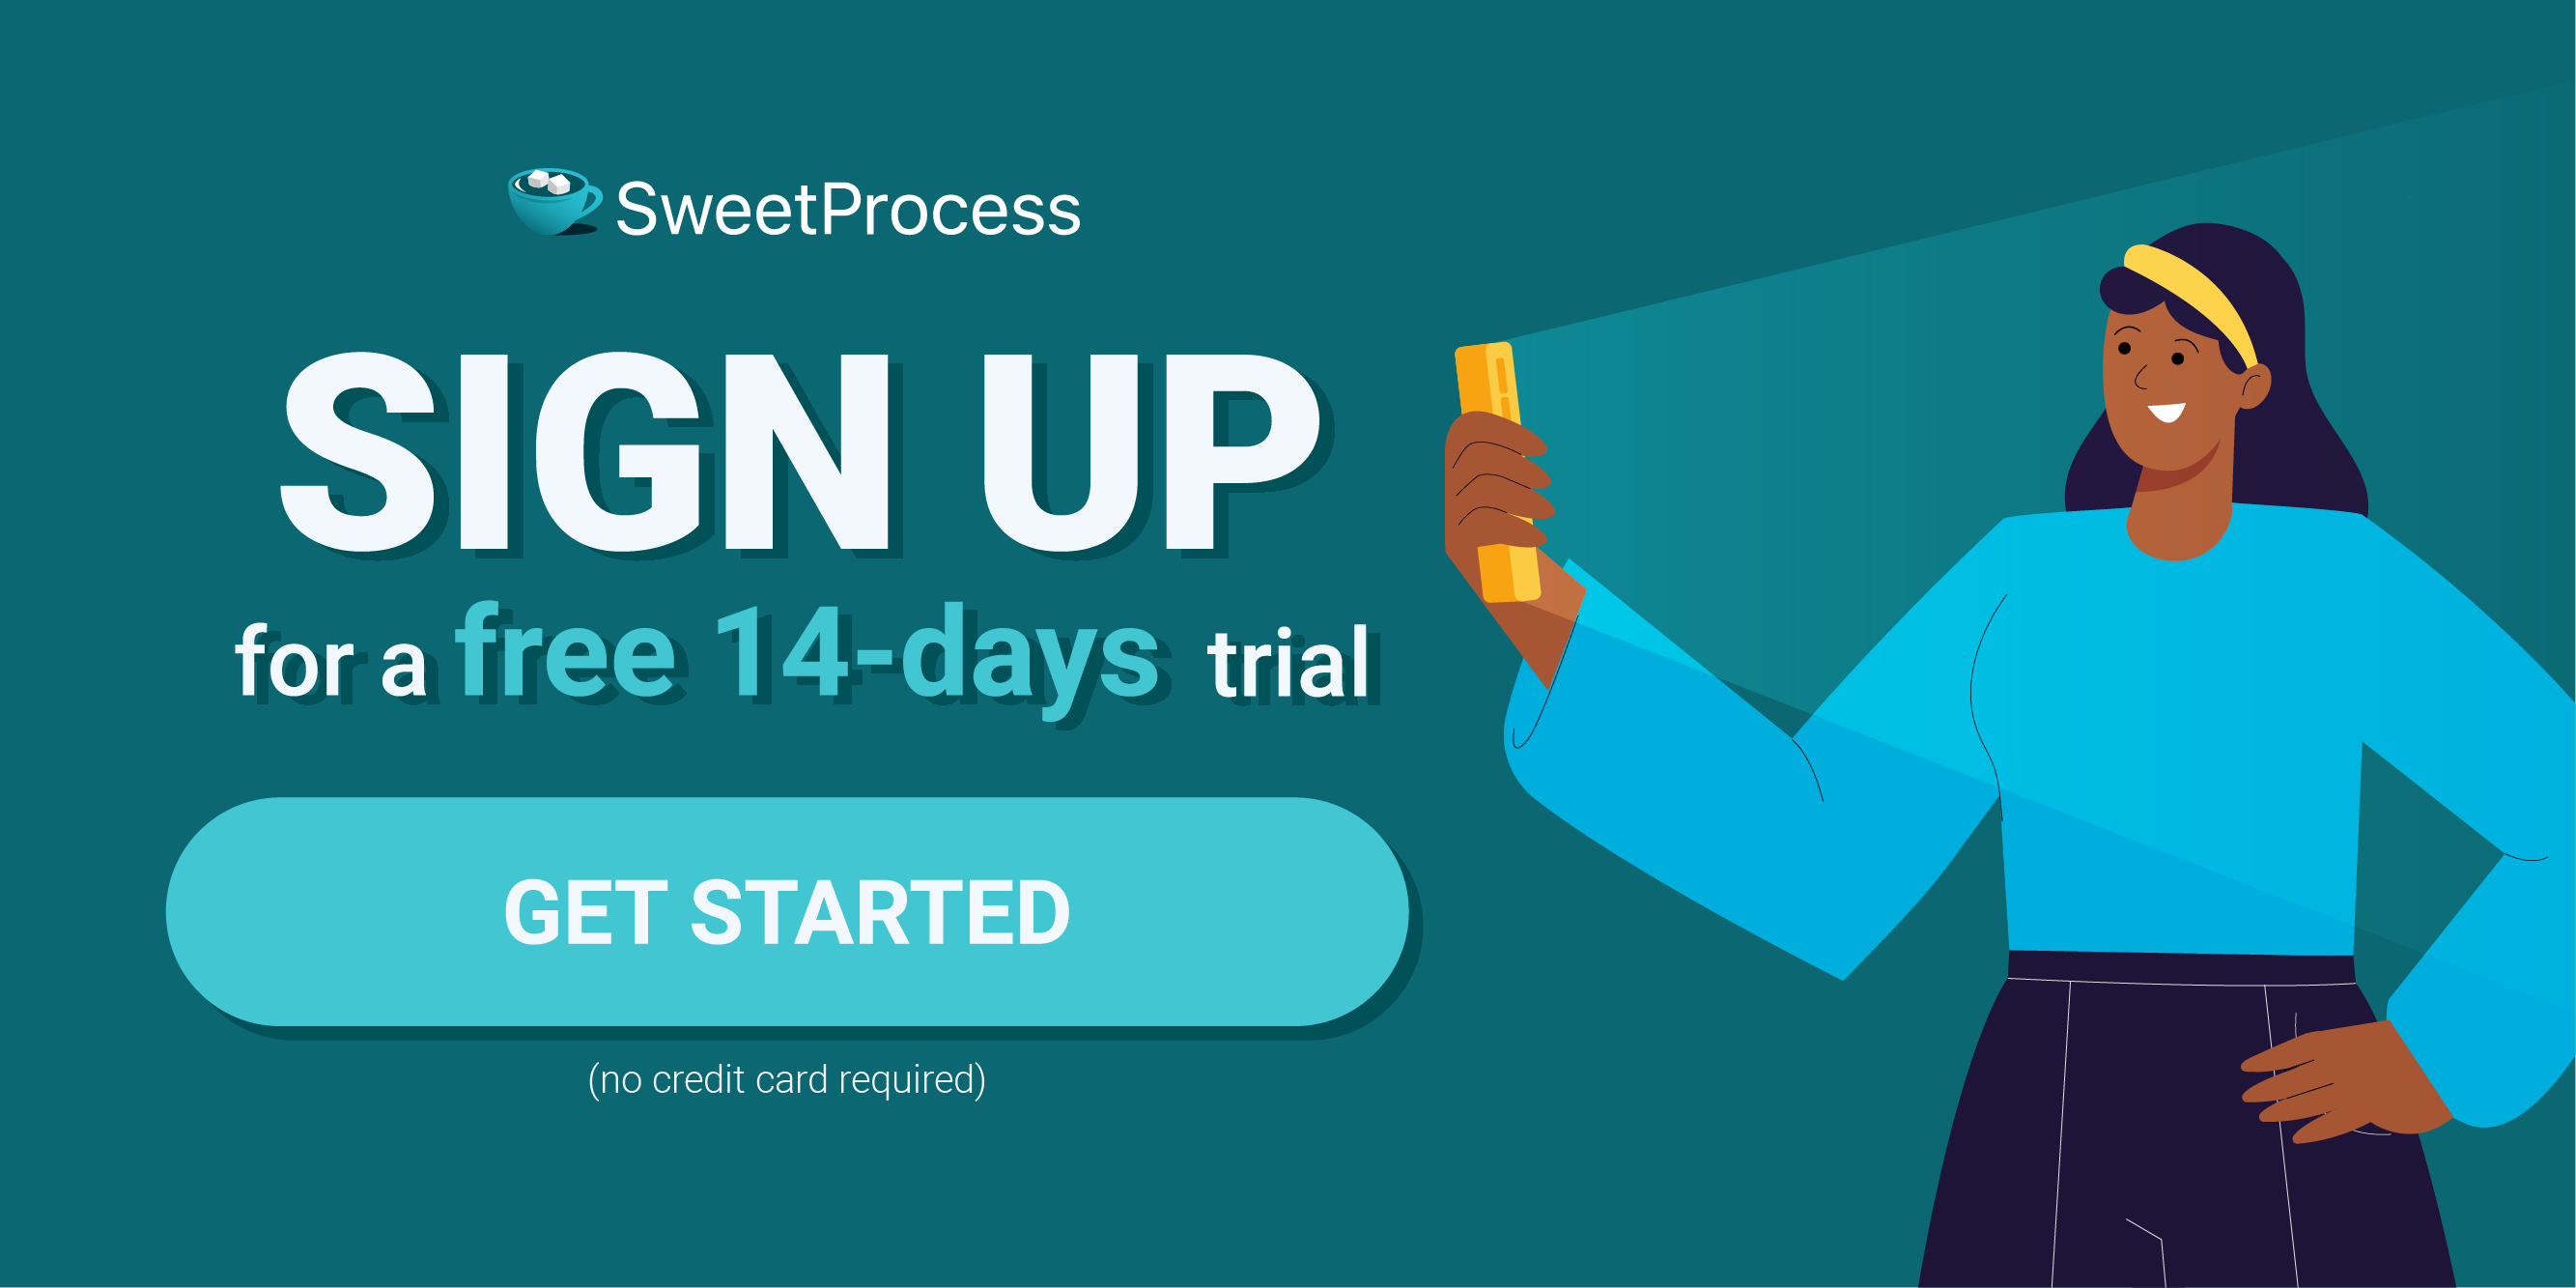 Sign up for a 14-day free trial of SweetProcess